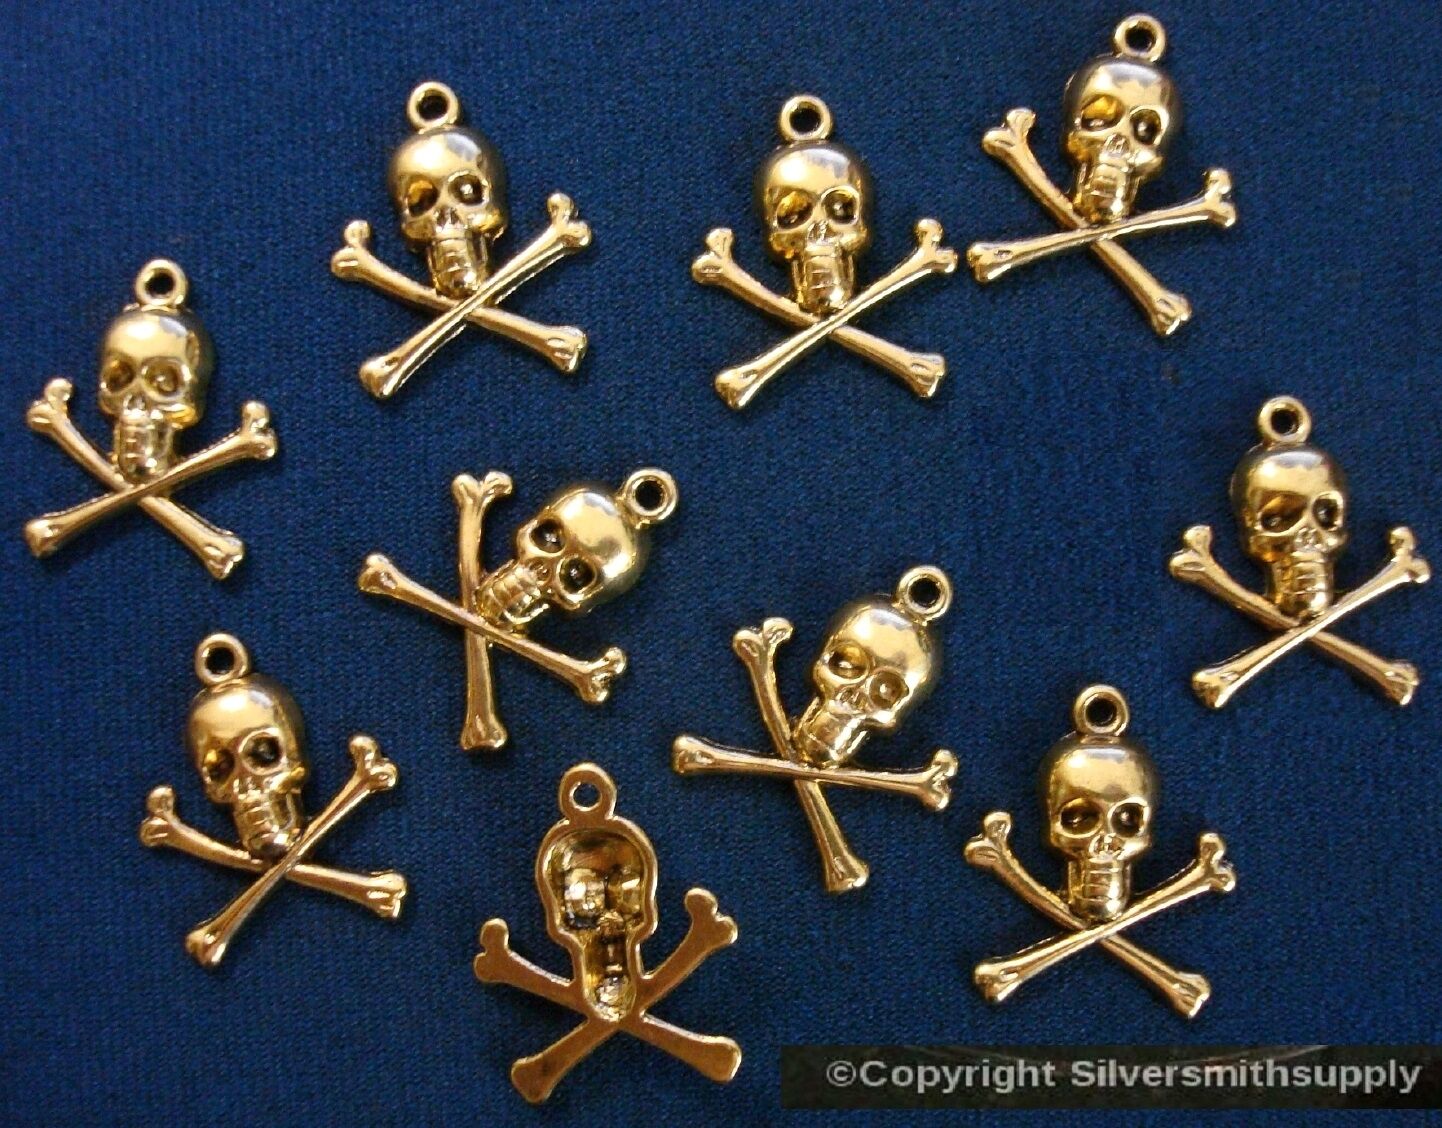 10 Golden skulls jewelry pendant charms ant gold plated skull findings CFP084 Silversmithsupply.com